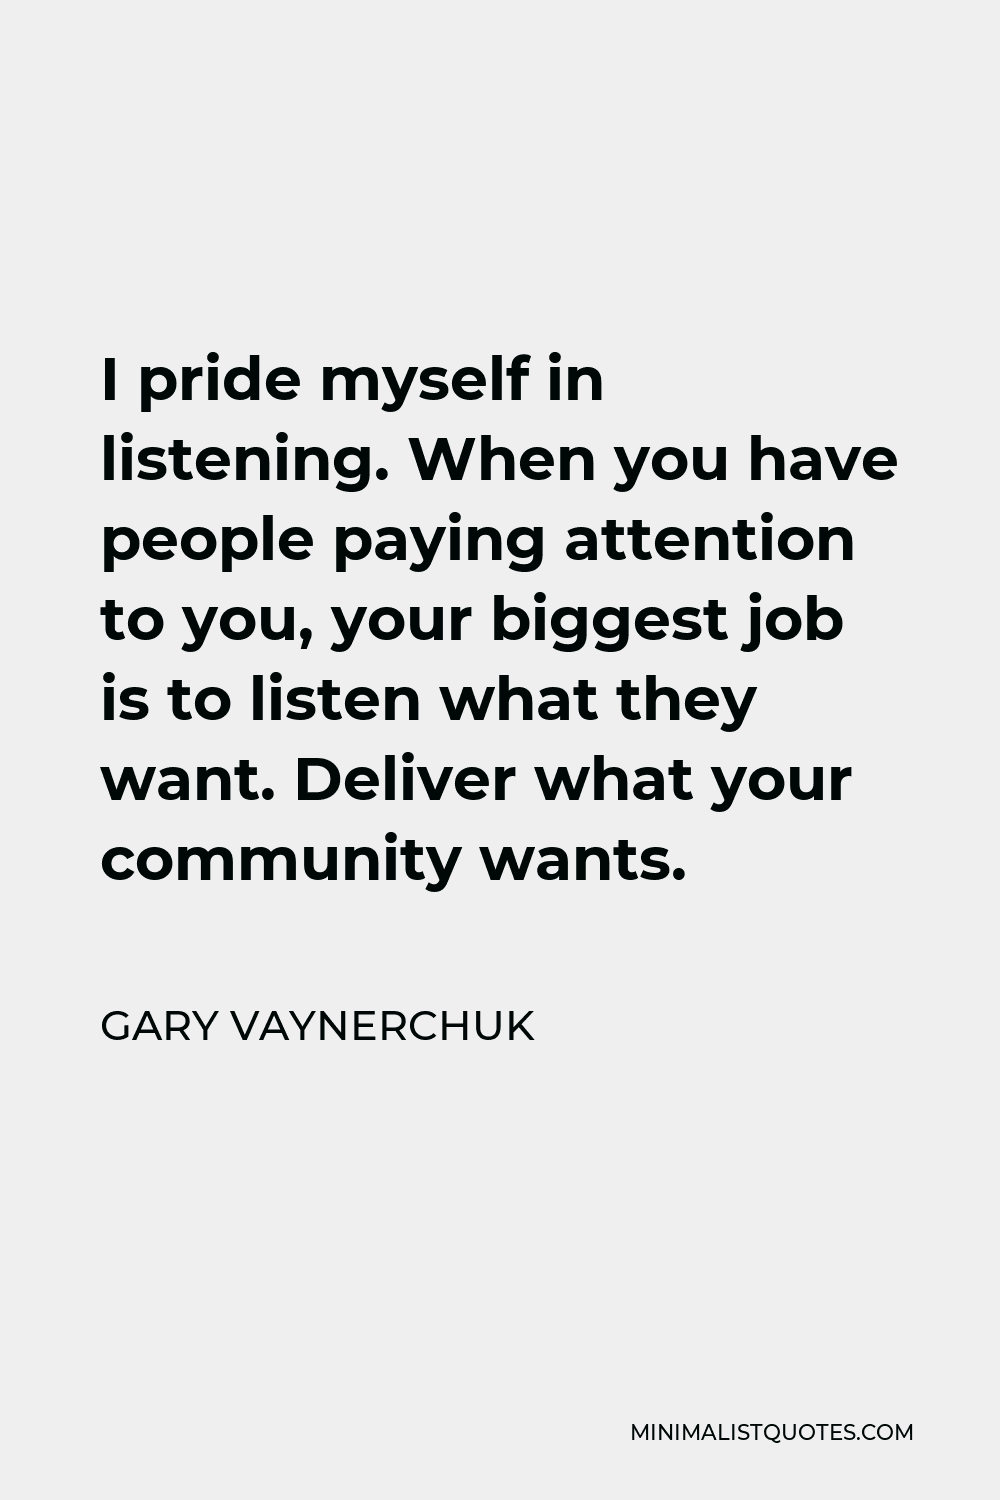 Gary Vaynerchuk Quote - I pride myself in listening. When you have people paying attention to you, your biggest job is to listen what they want. Deliver what your community wants.